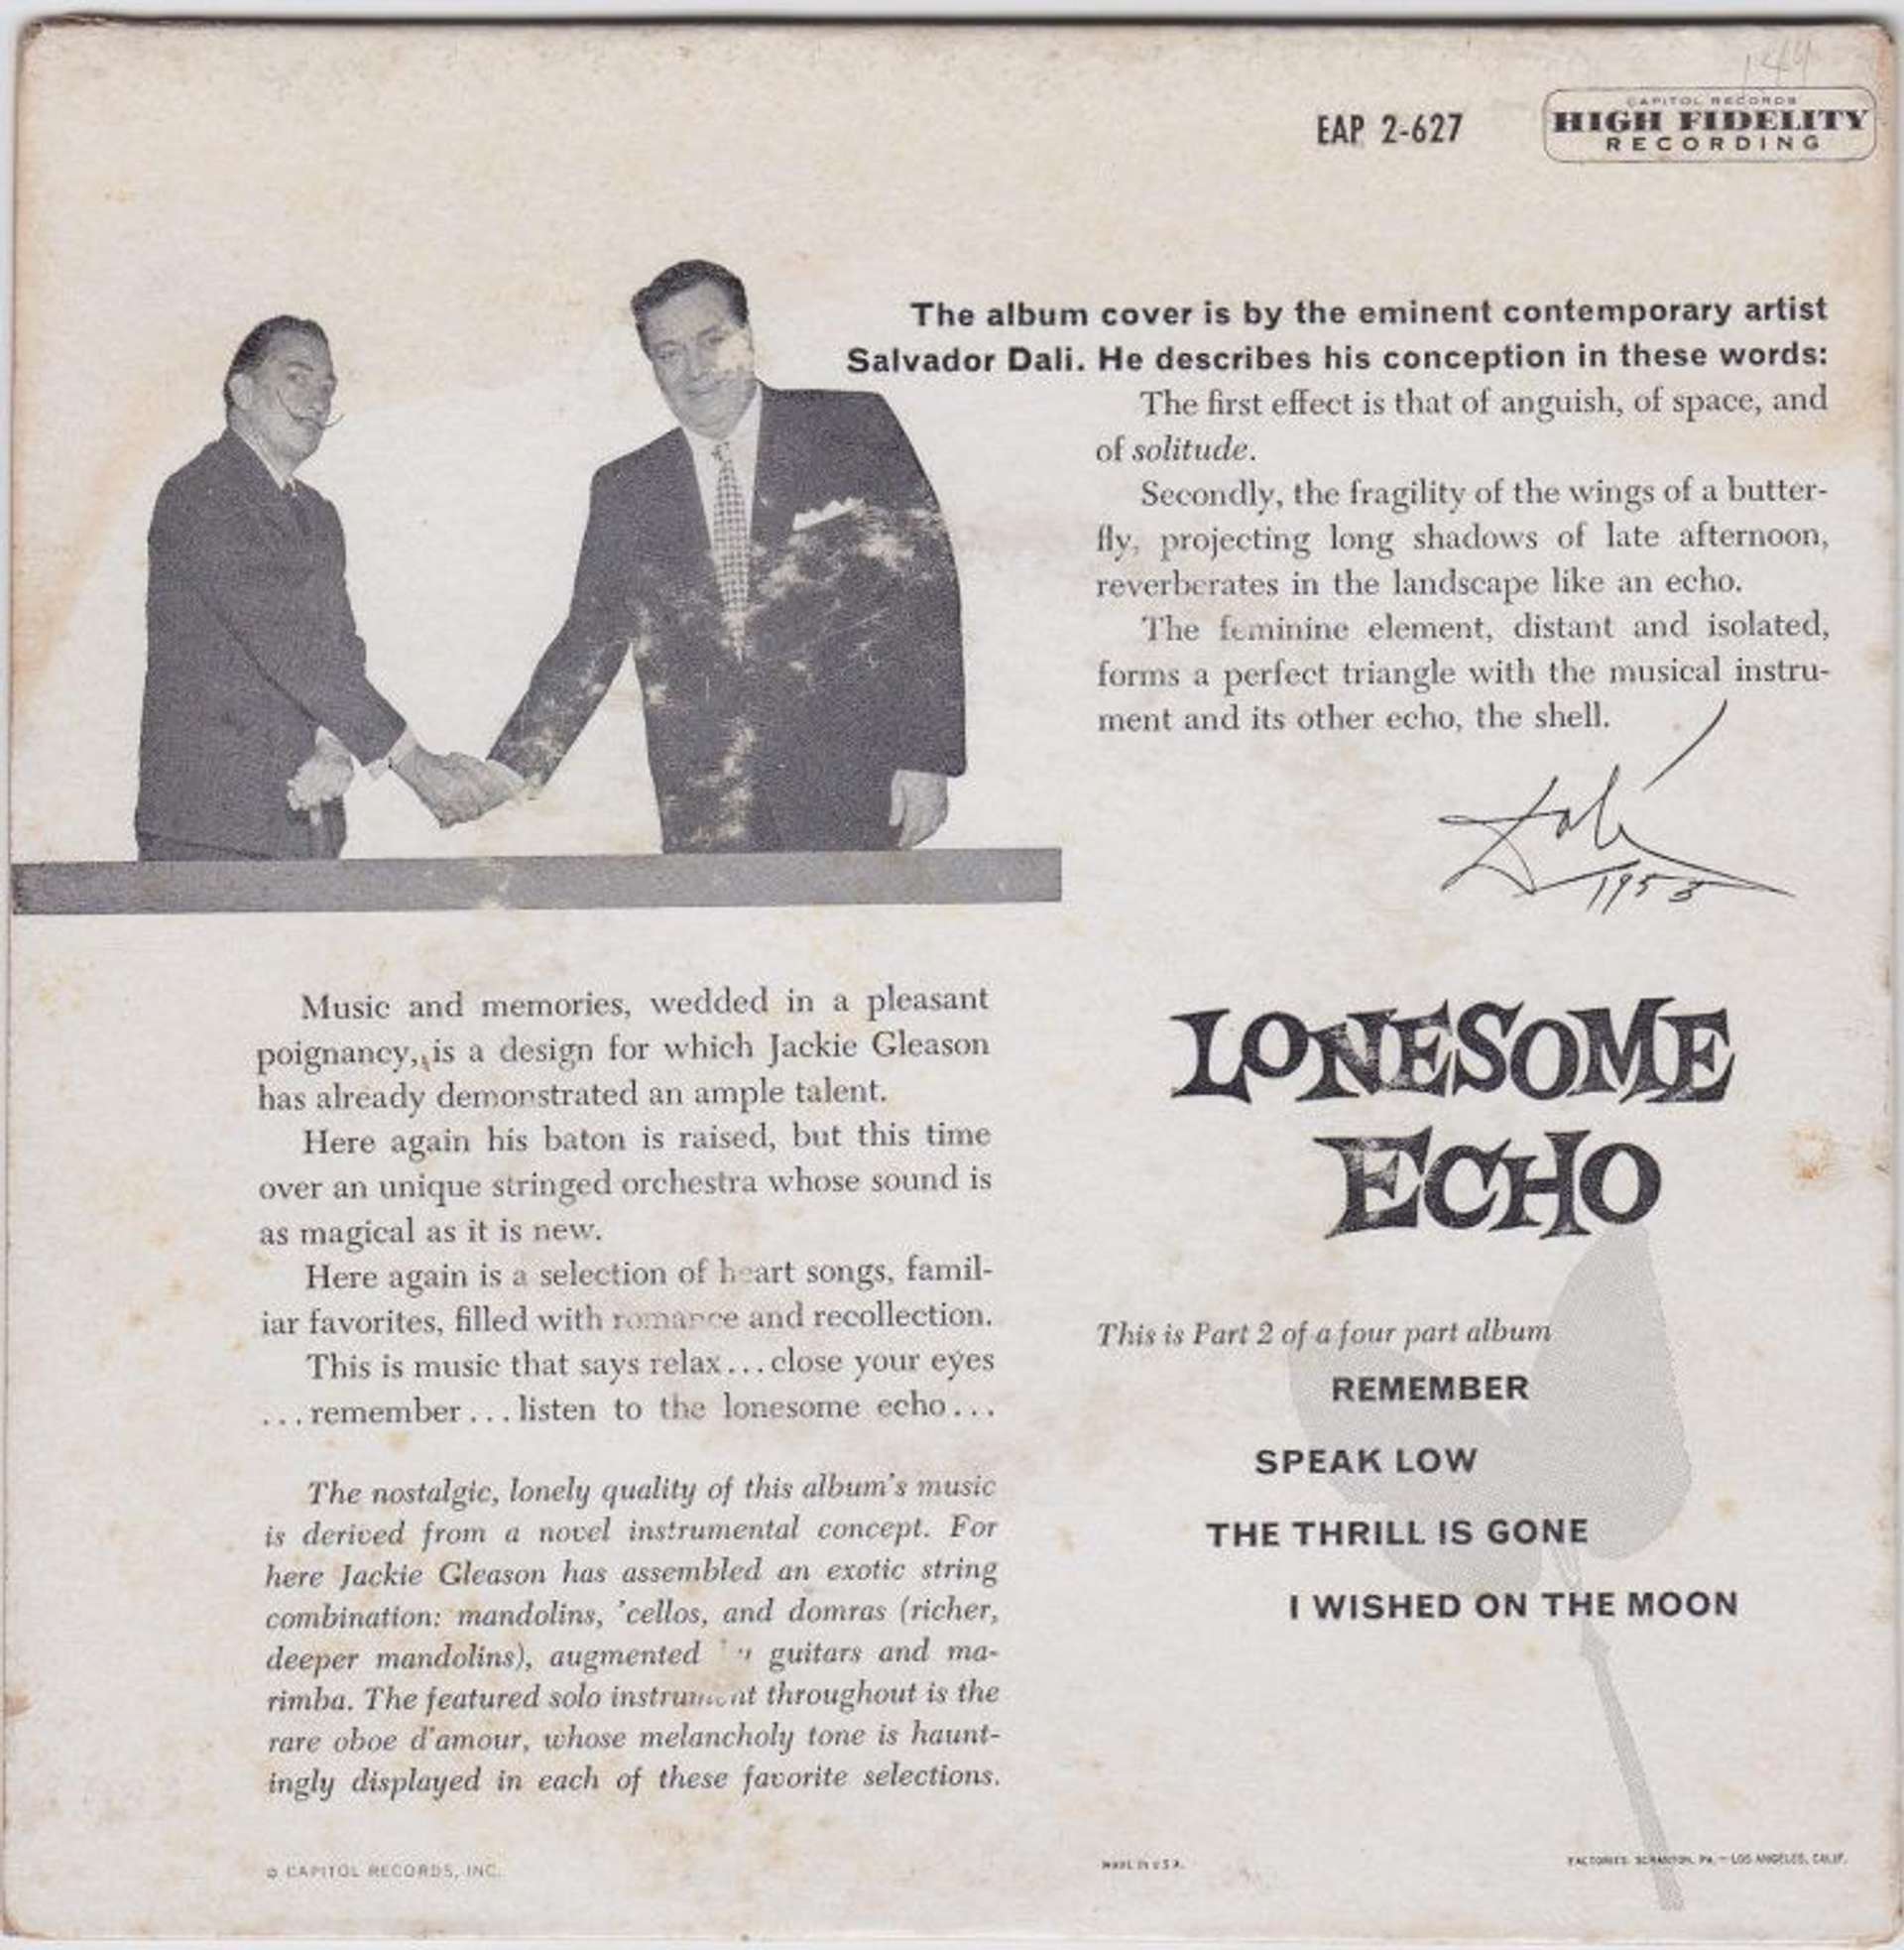  An image of the back cover of the album Lonesome Echo by Jackie Gleason, showing the singer shaking hands with artist Salvador Dalí